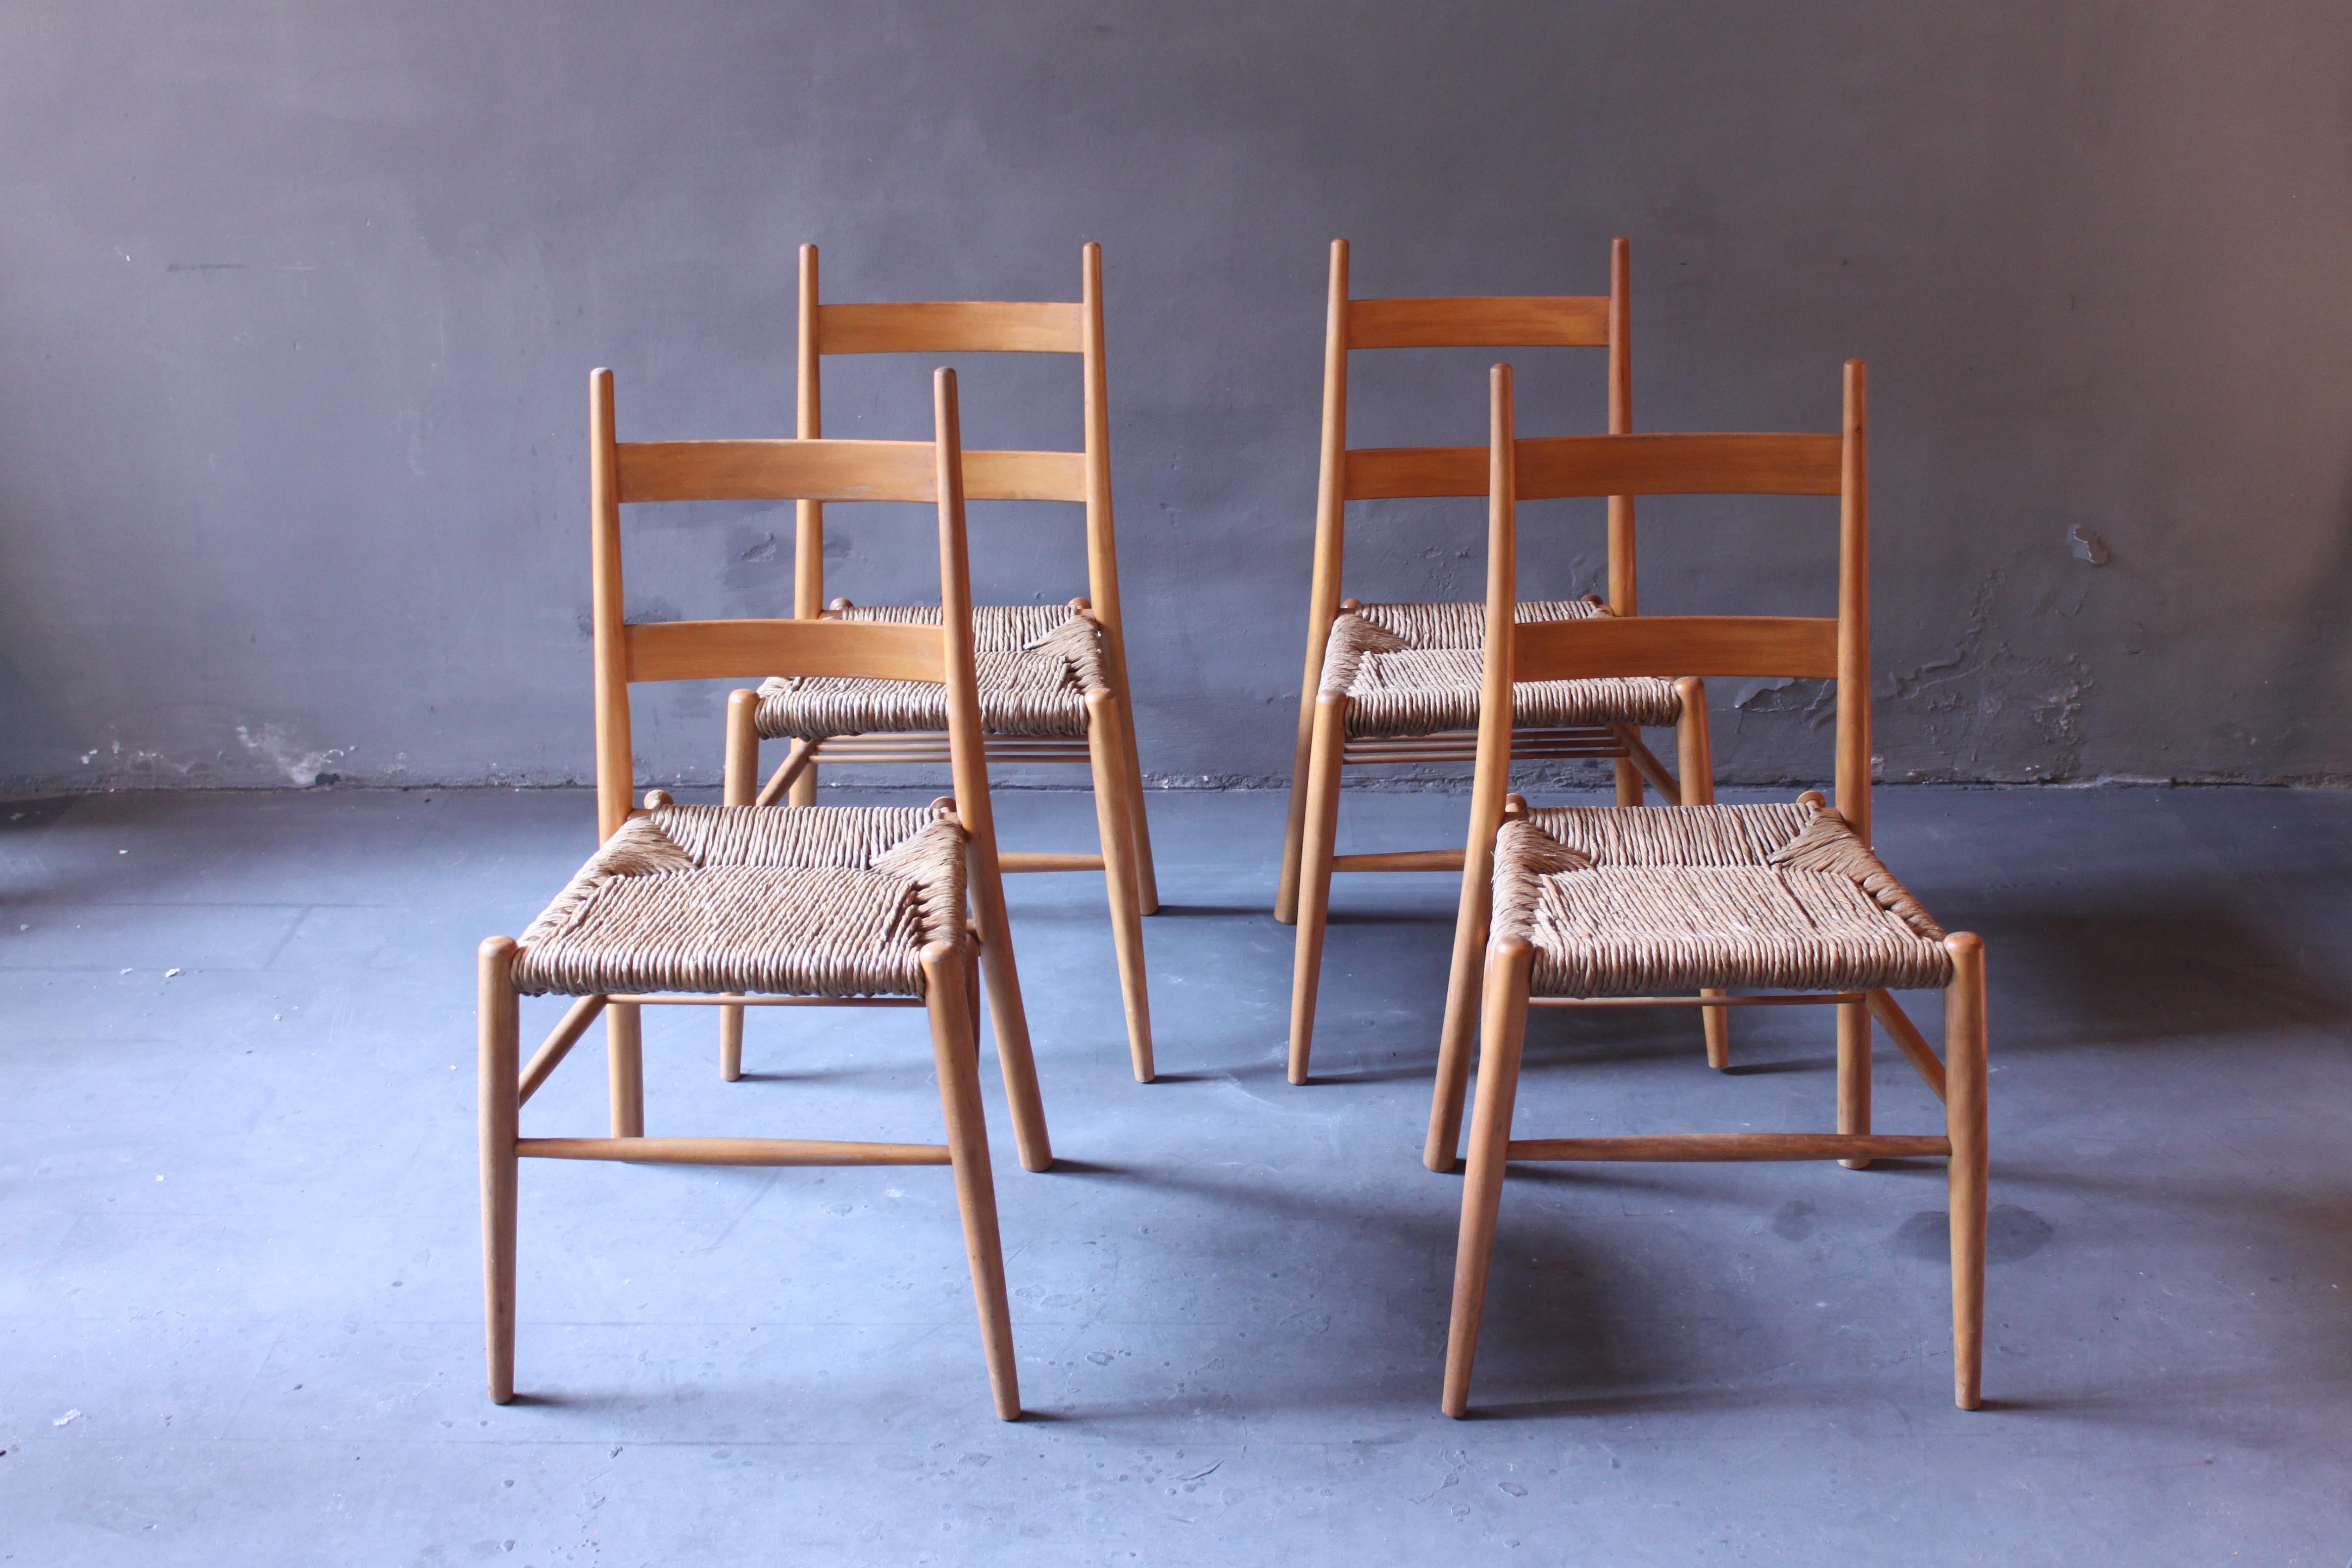 These mid-century church chairs are perfect for a kitchen or dining room. Wicker seat and birchwood frame. They have two handbag holders on the back and a shelf space underneath the seat.
From basket weaving in the Fertile Crescent to Victorian